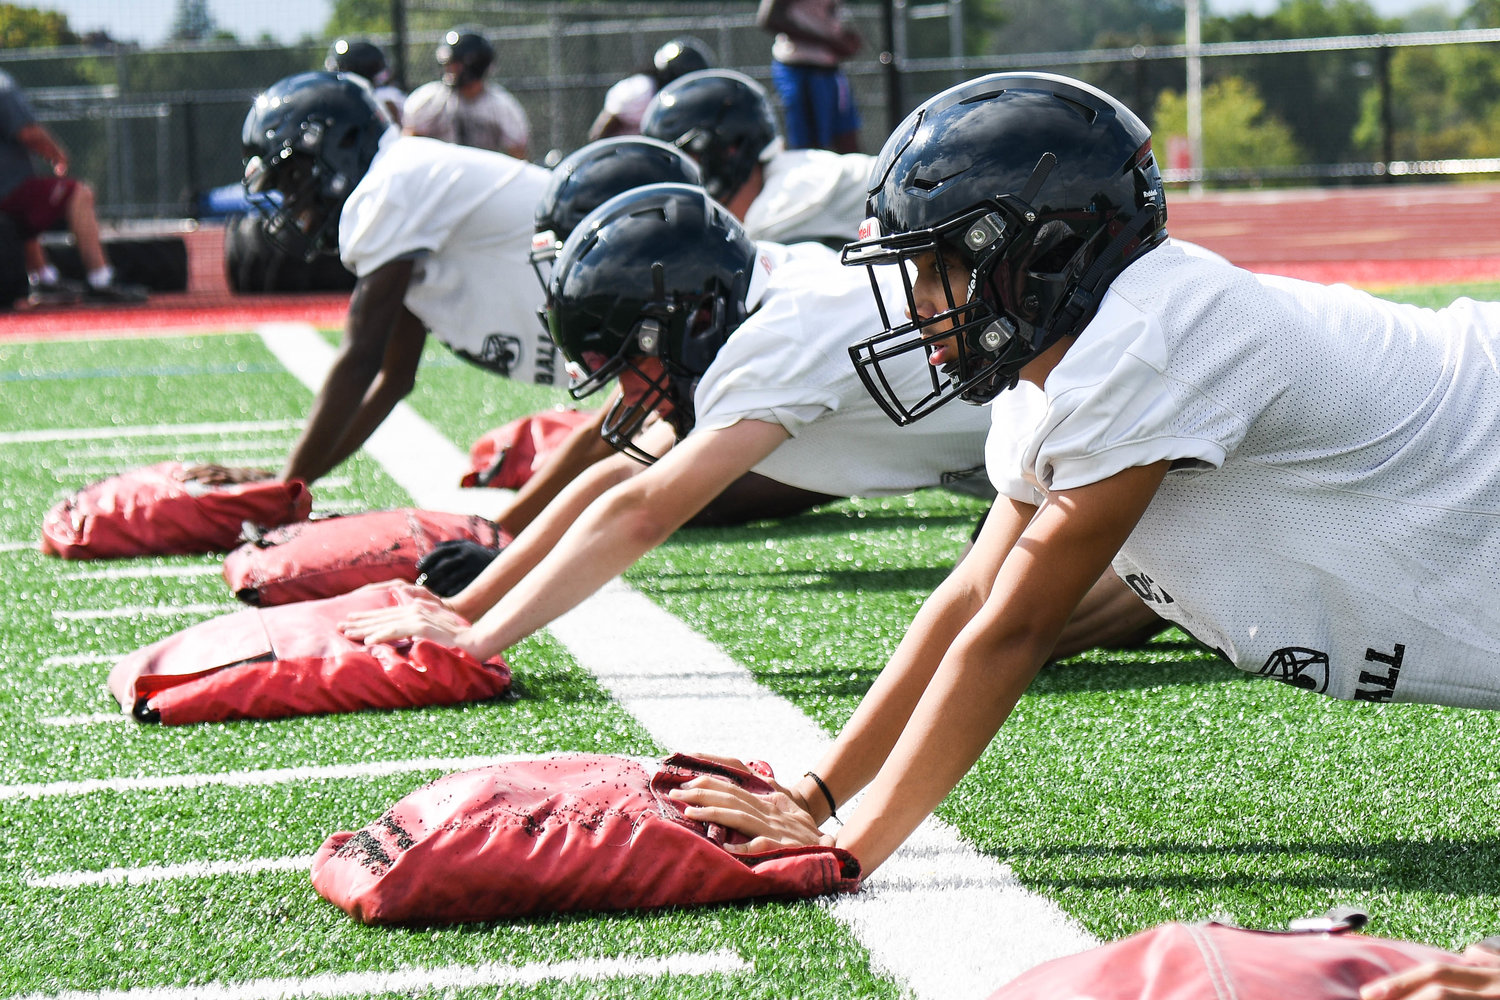 Proctor football players prepare to push sandbags across the turf during conditioning drills at practice on Aug. 22.